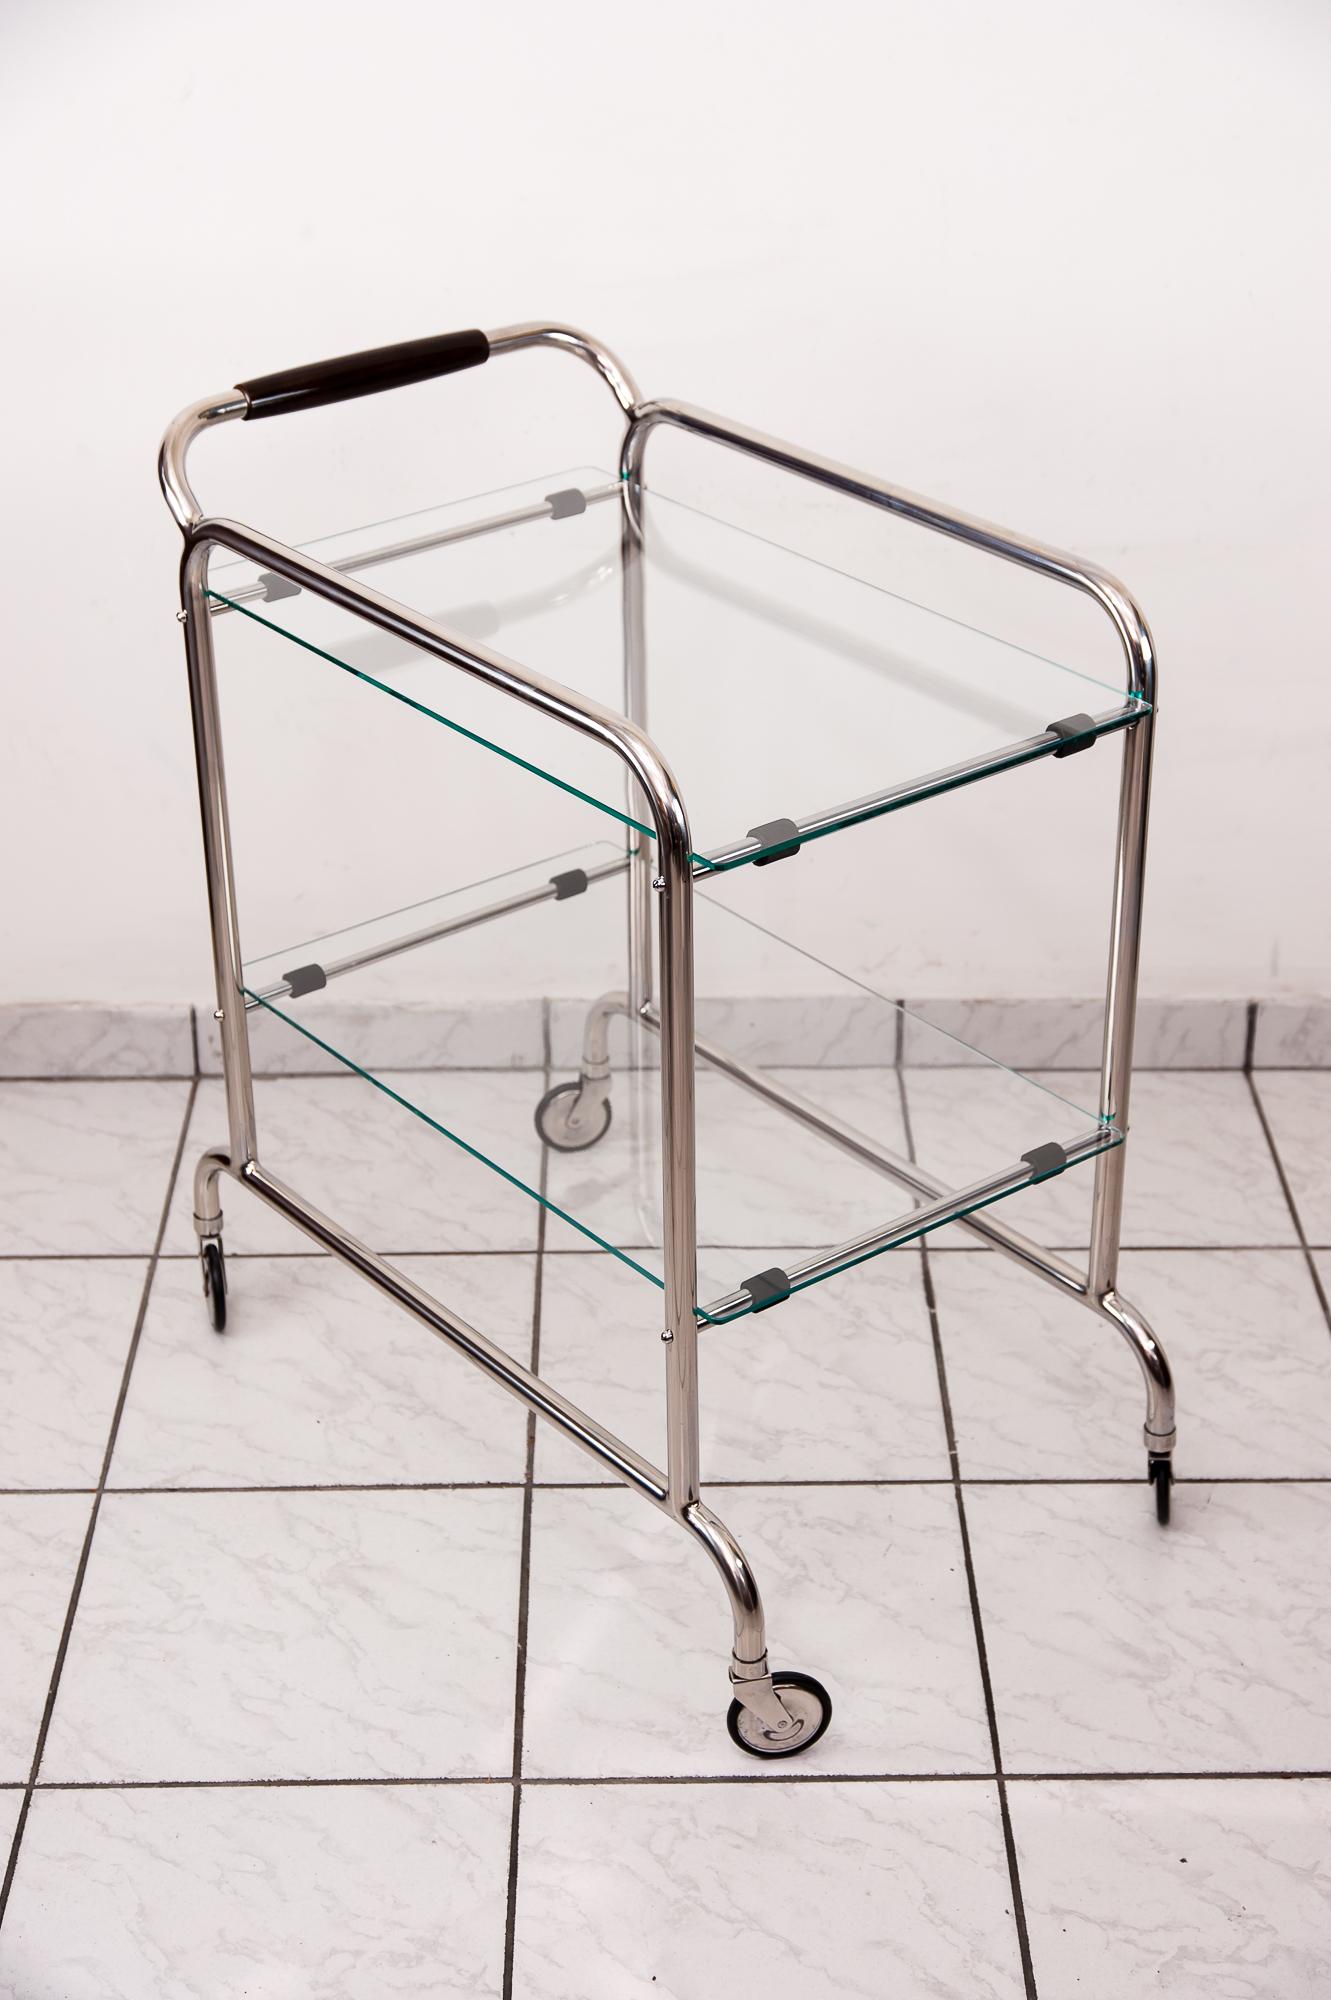 Art Deco serving cart 1920s attributed to Thonet.
Original condition.